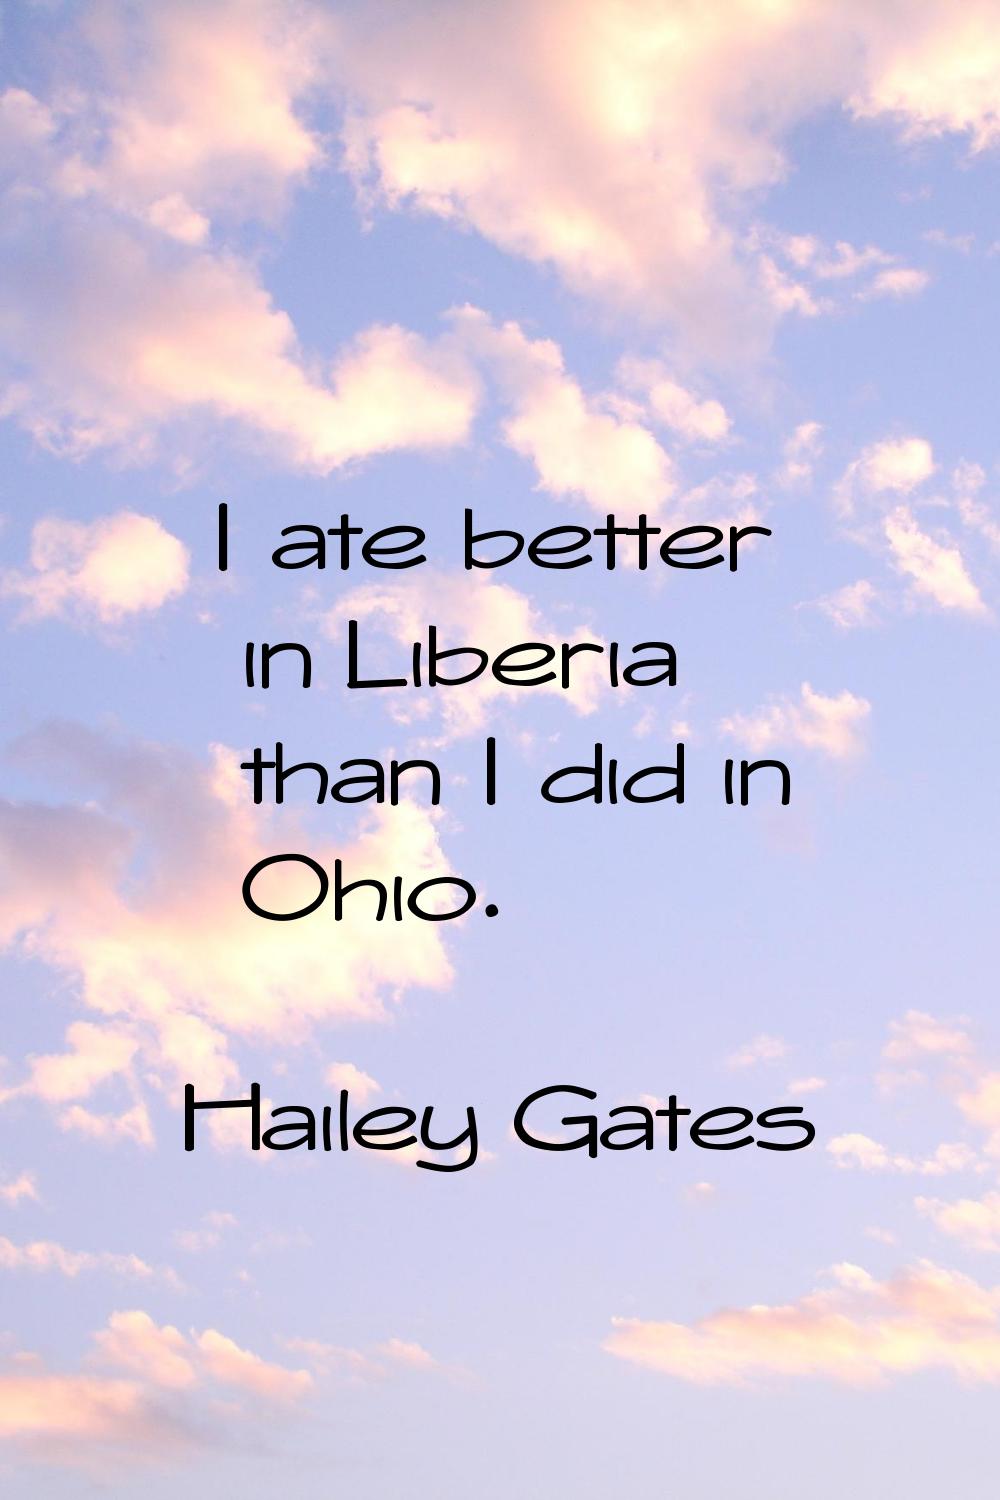 I ate better in Liberia than I did in Ohio.